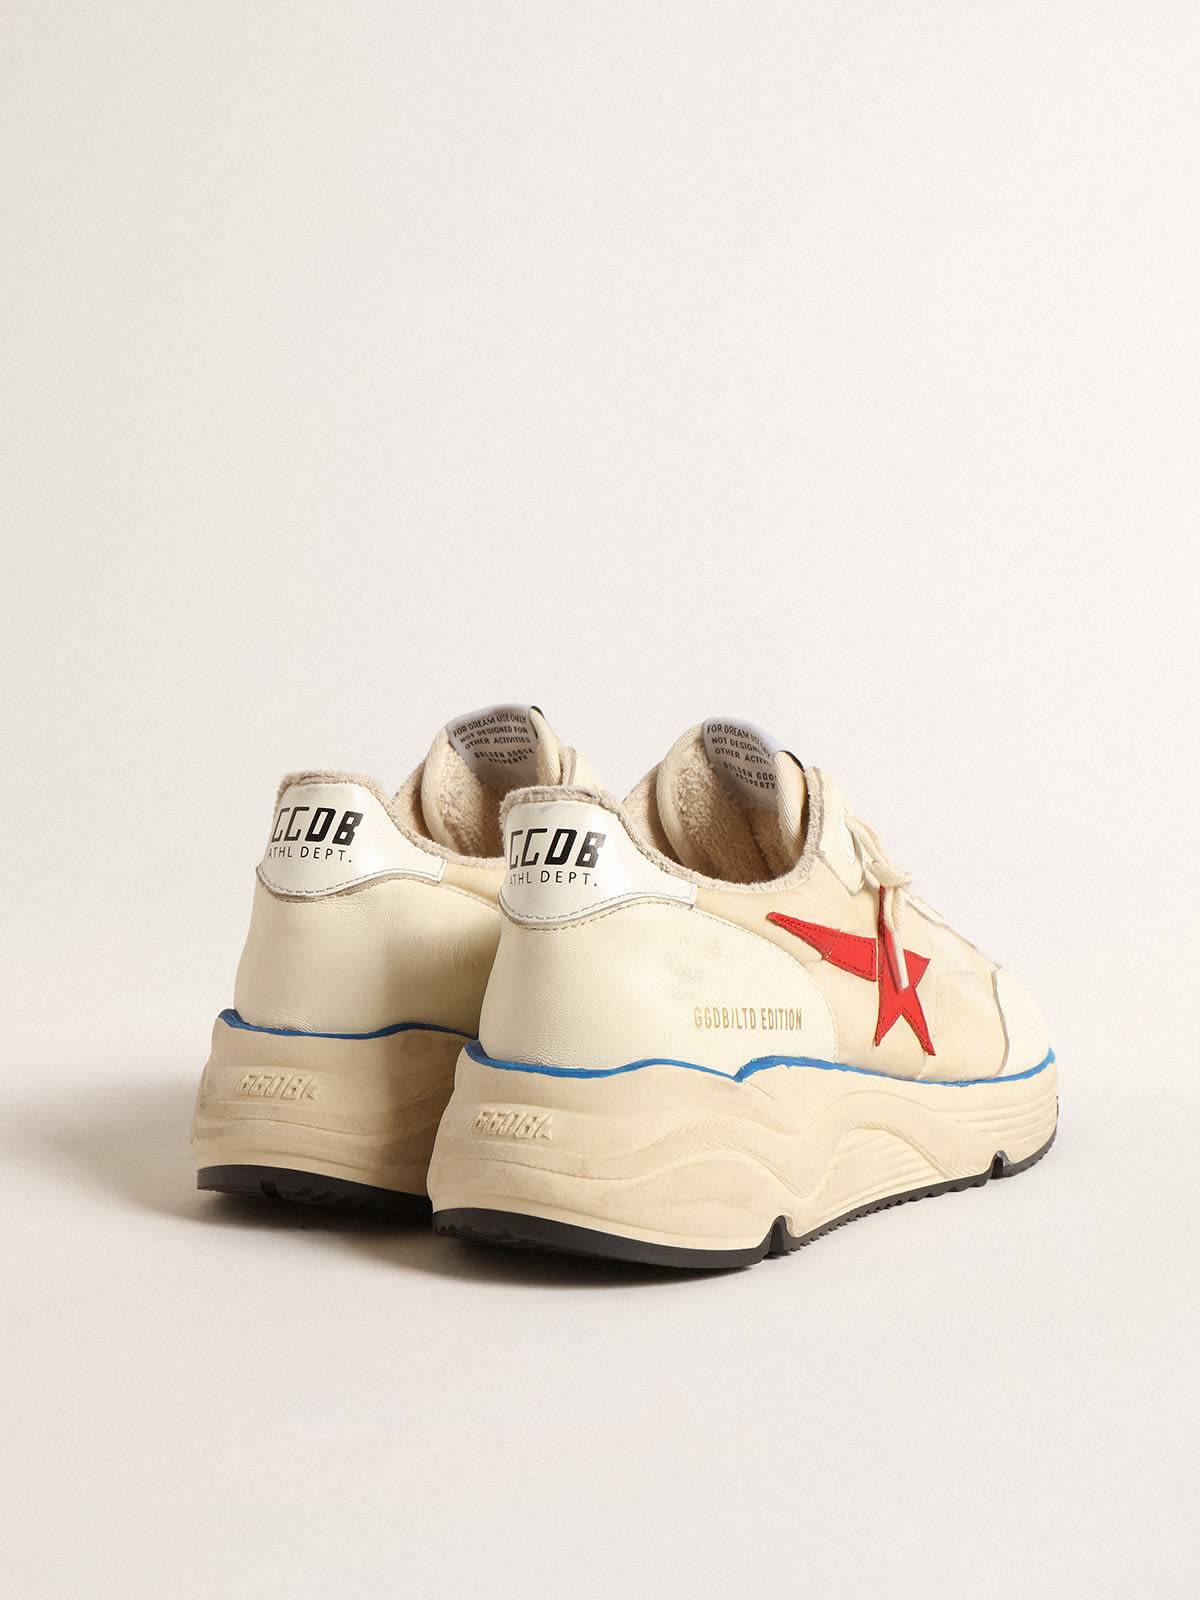 Golden Goose - Men’s Running Sole LTD in beige nylon with red leather star in 